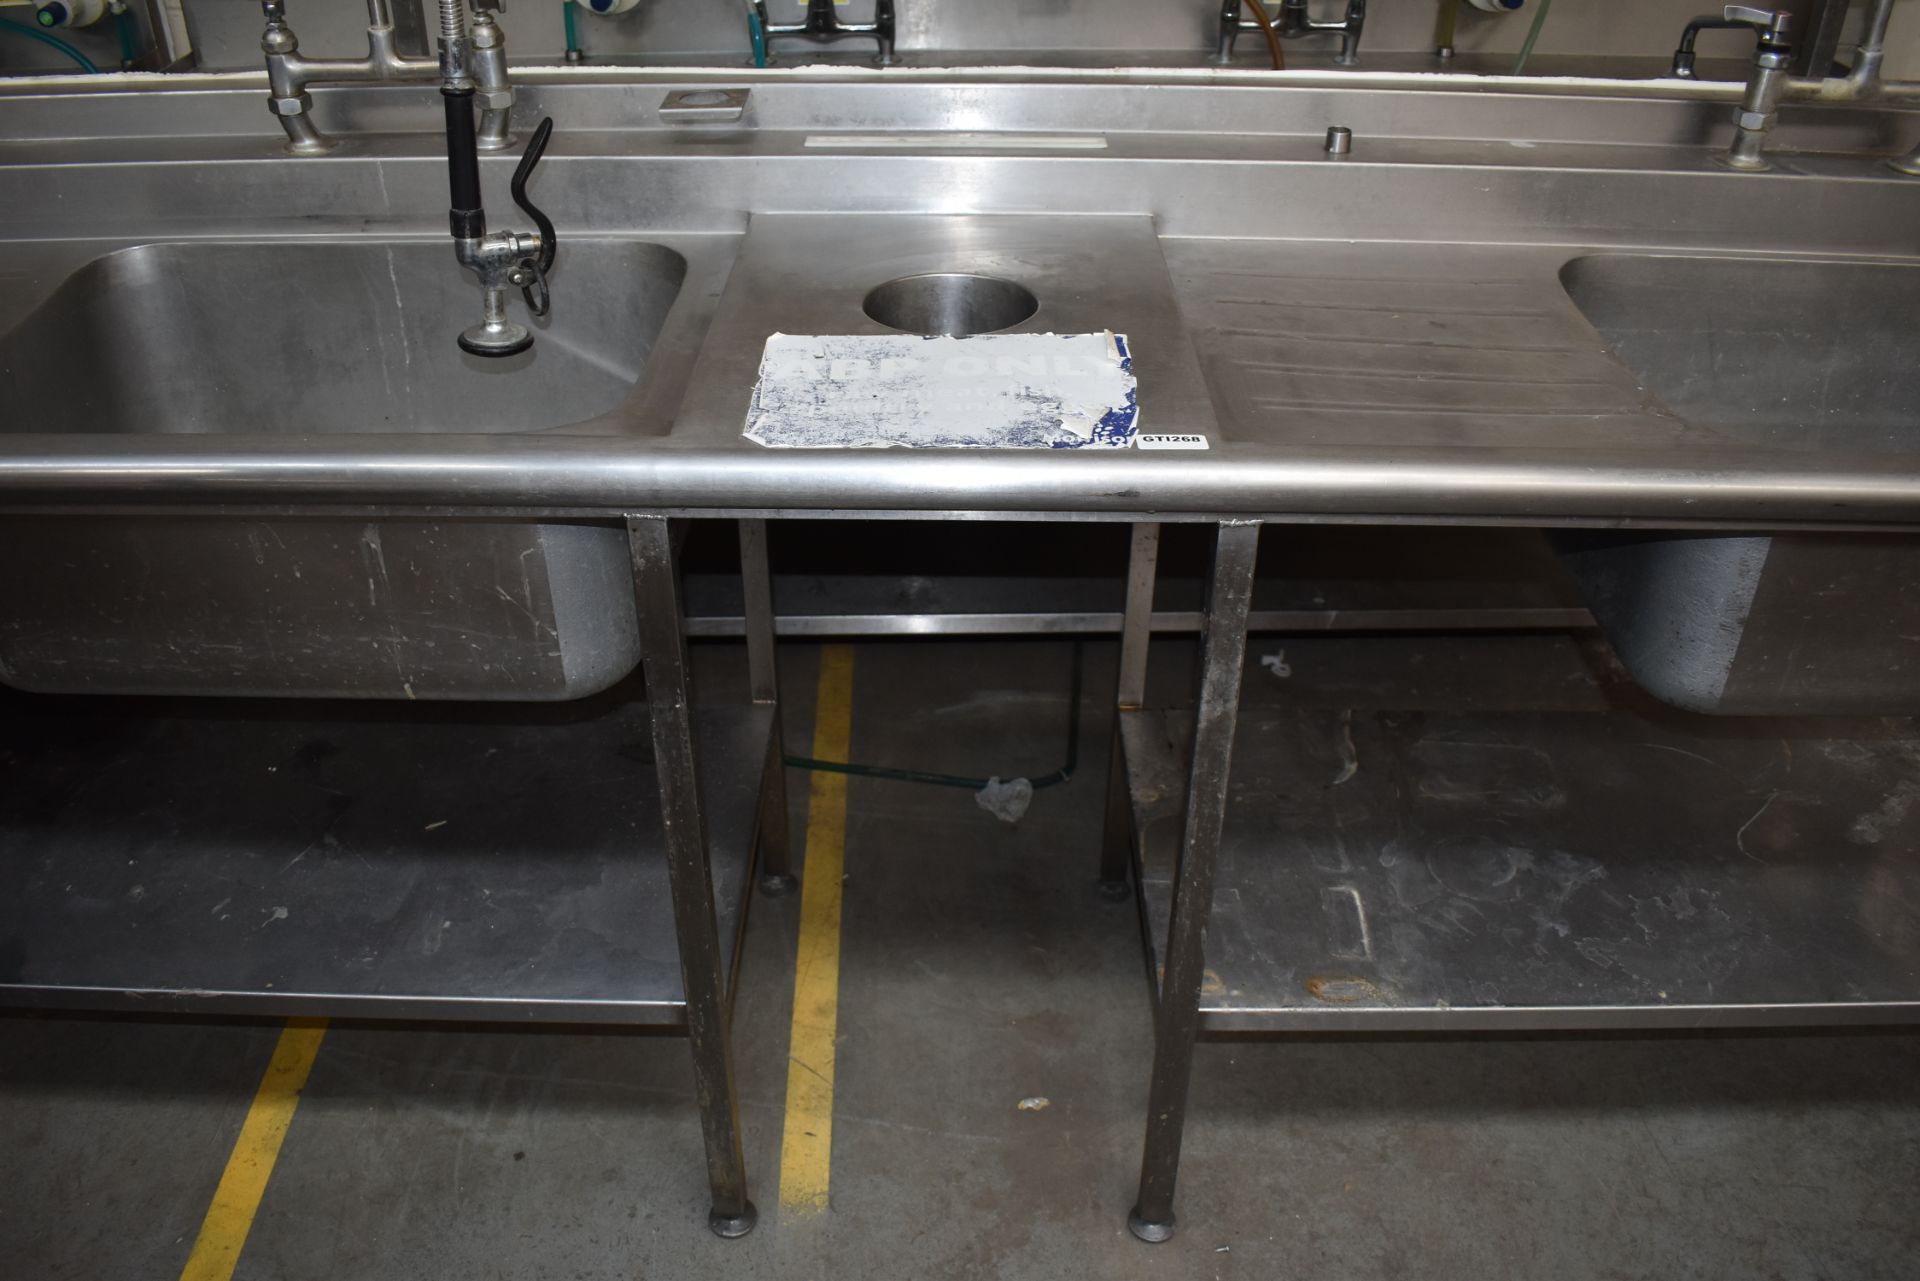 1 x Stainless Steel Commercial Wash Basin Unit With Twin Sink Bowl and Drainers, Mixer Taps, Spray - Image 11 of 12